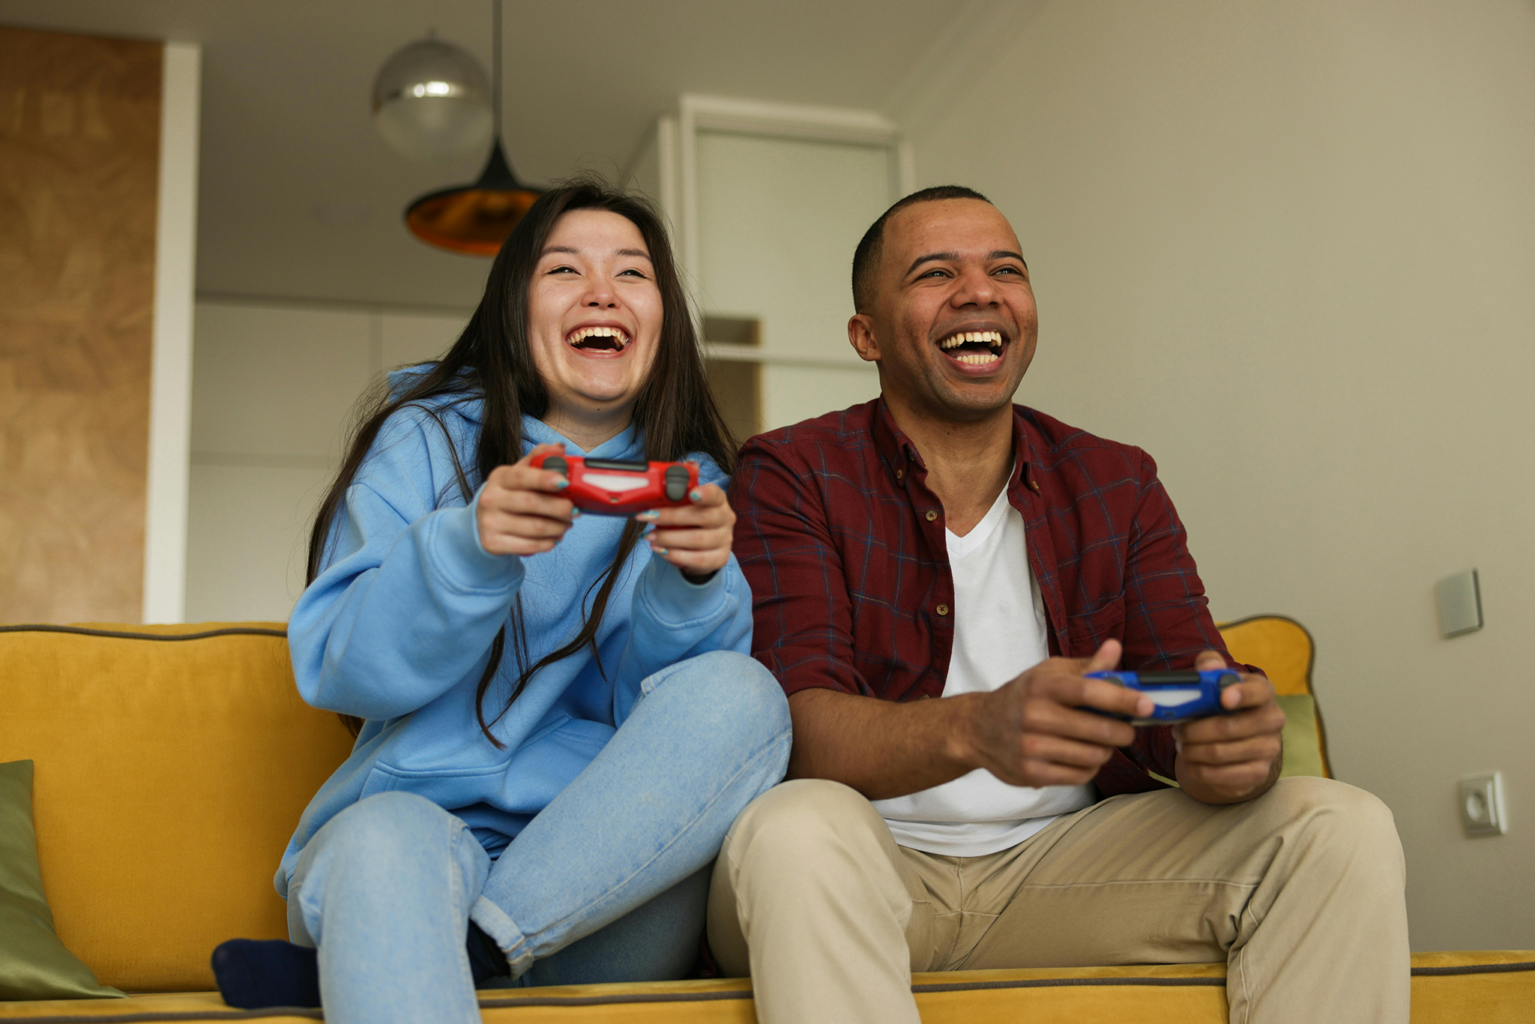 A man and woman playing video games together.